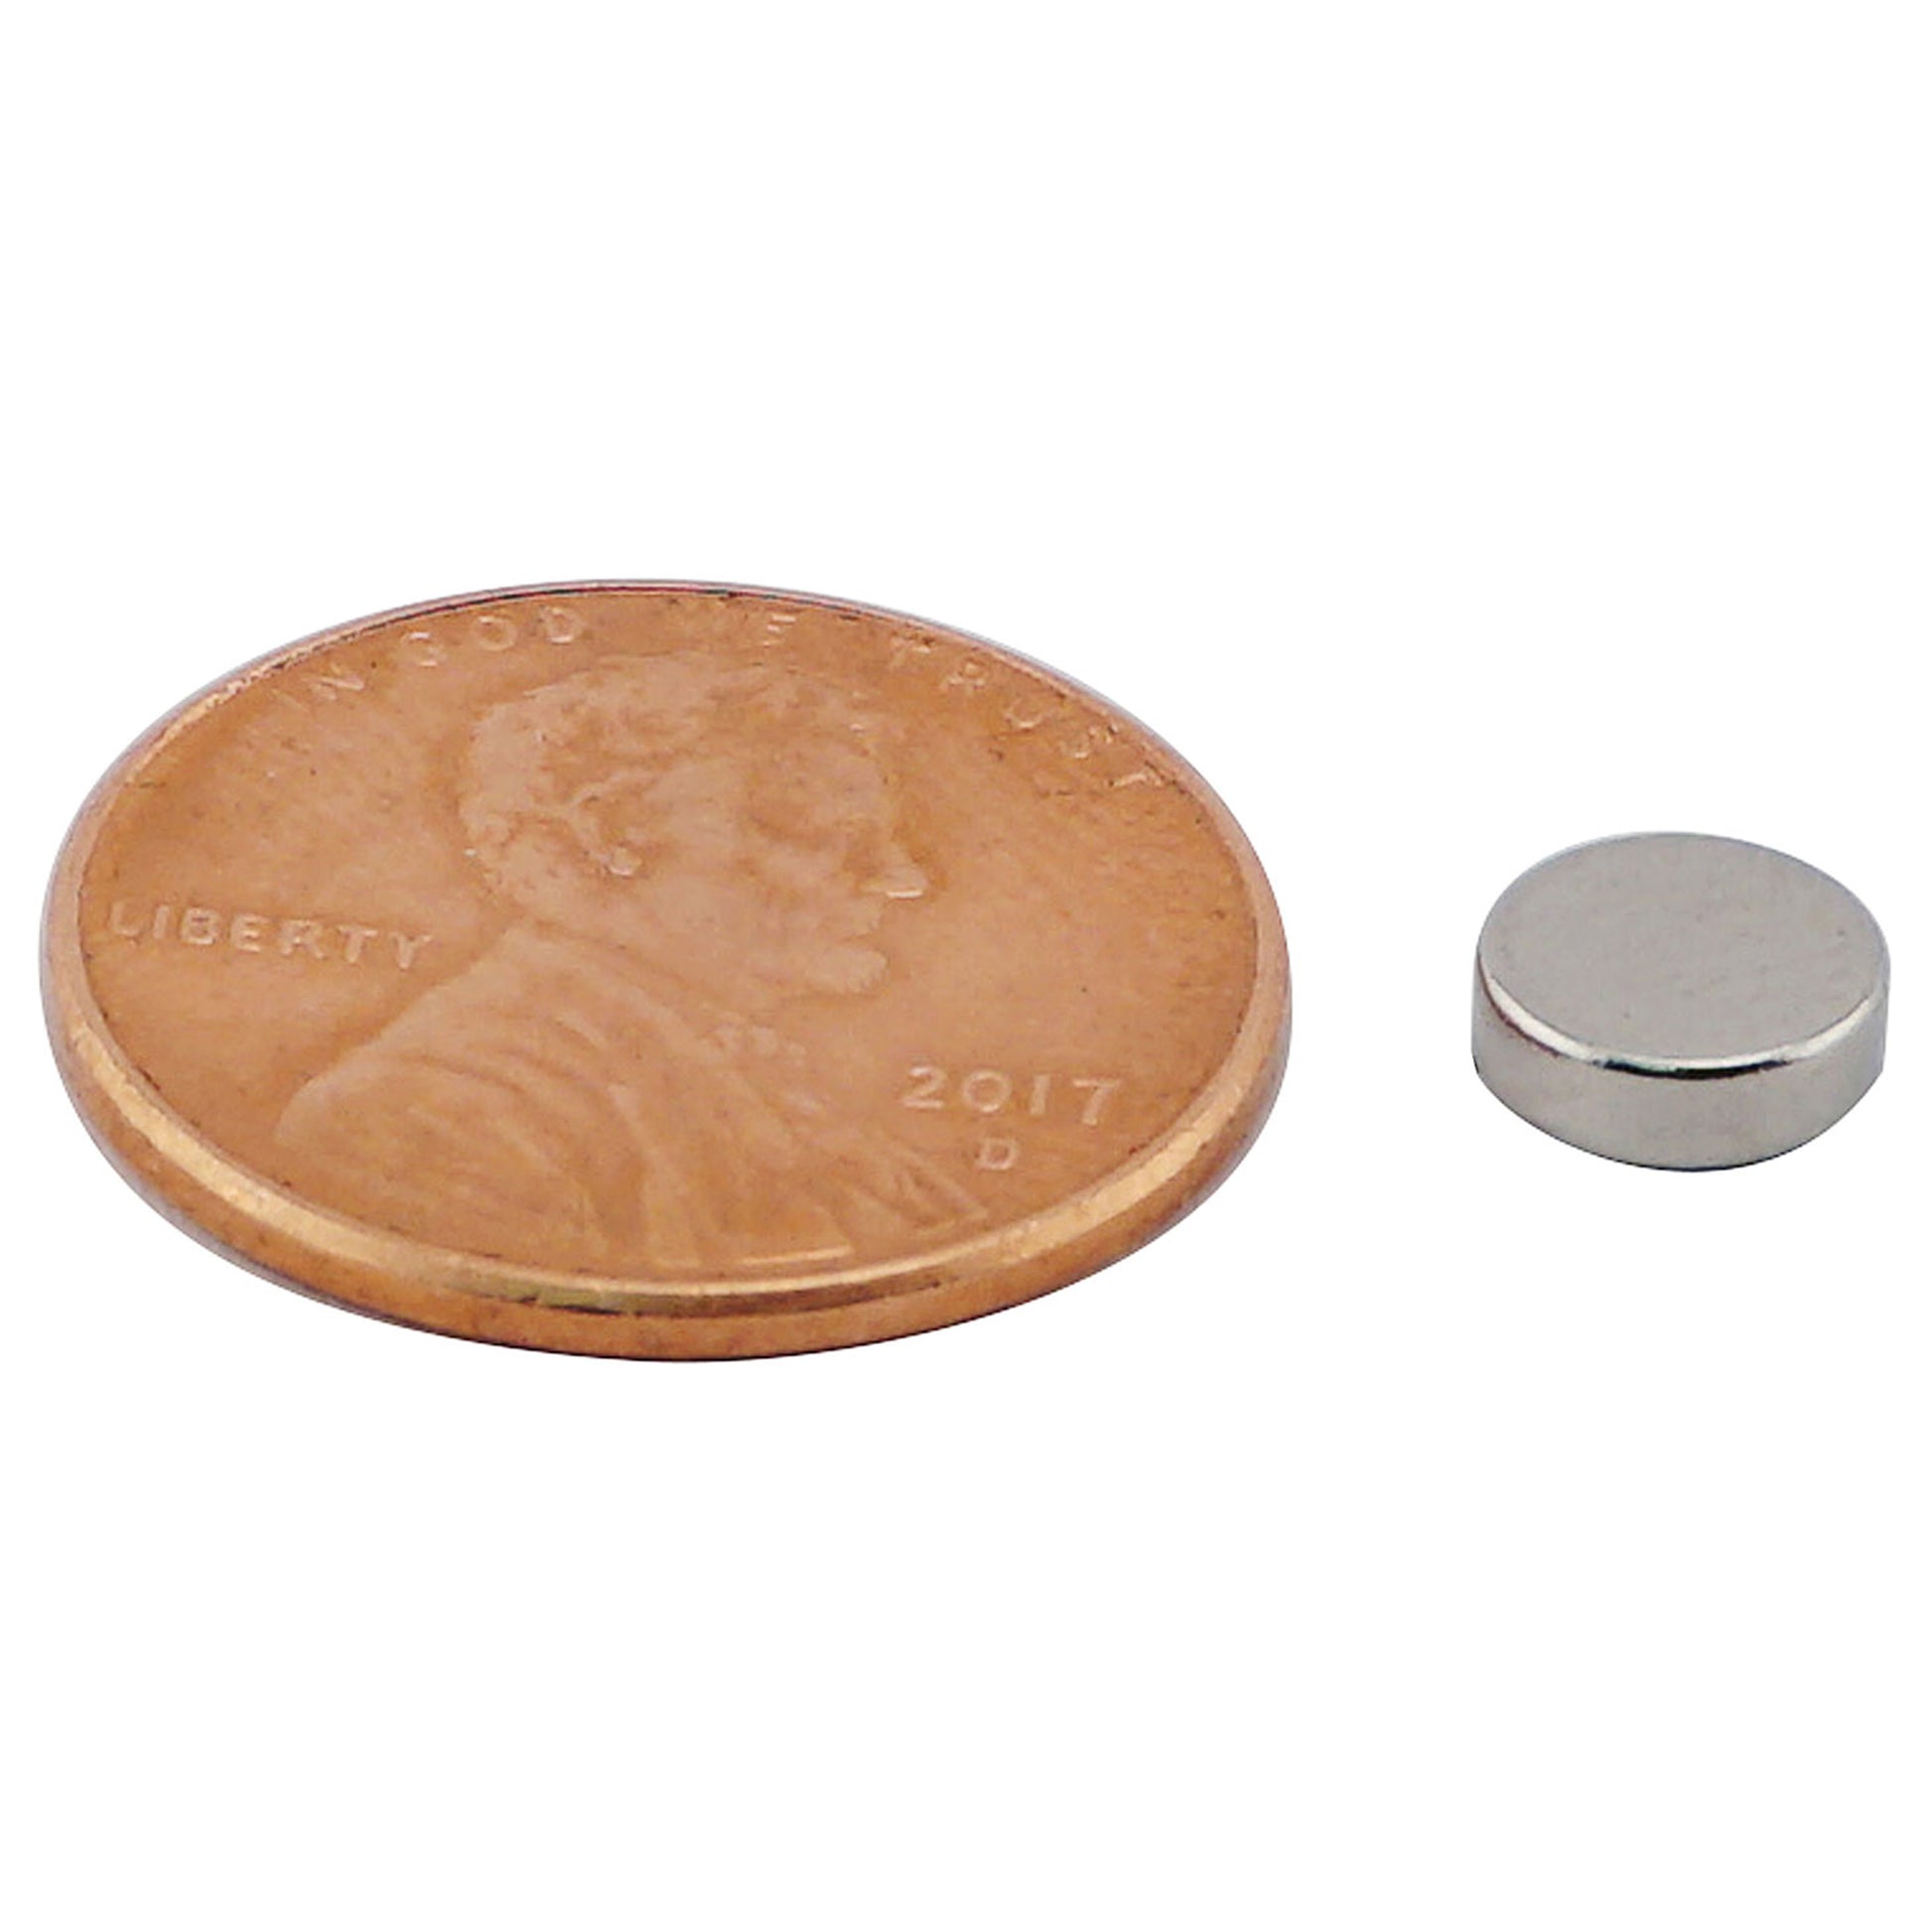 Load image into Gallery viewer, ND002507N Neodymium Disc Magnet - Compared to Penny for Size Reference